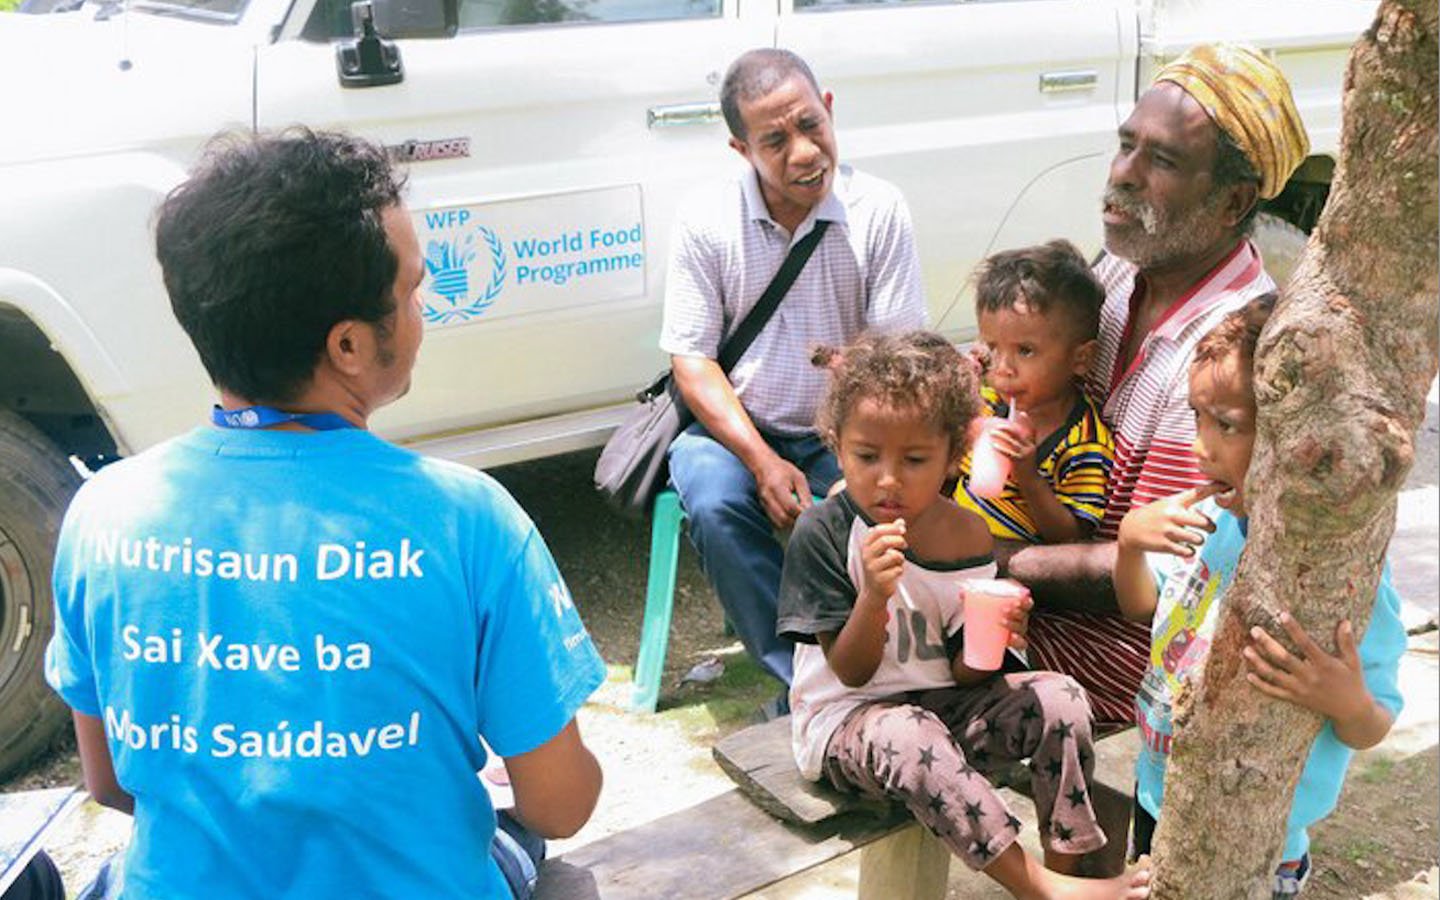 The World Food Program is distributing food aid in Timor-Leste